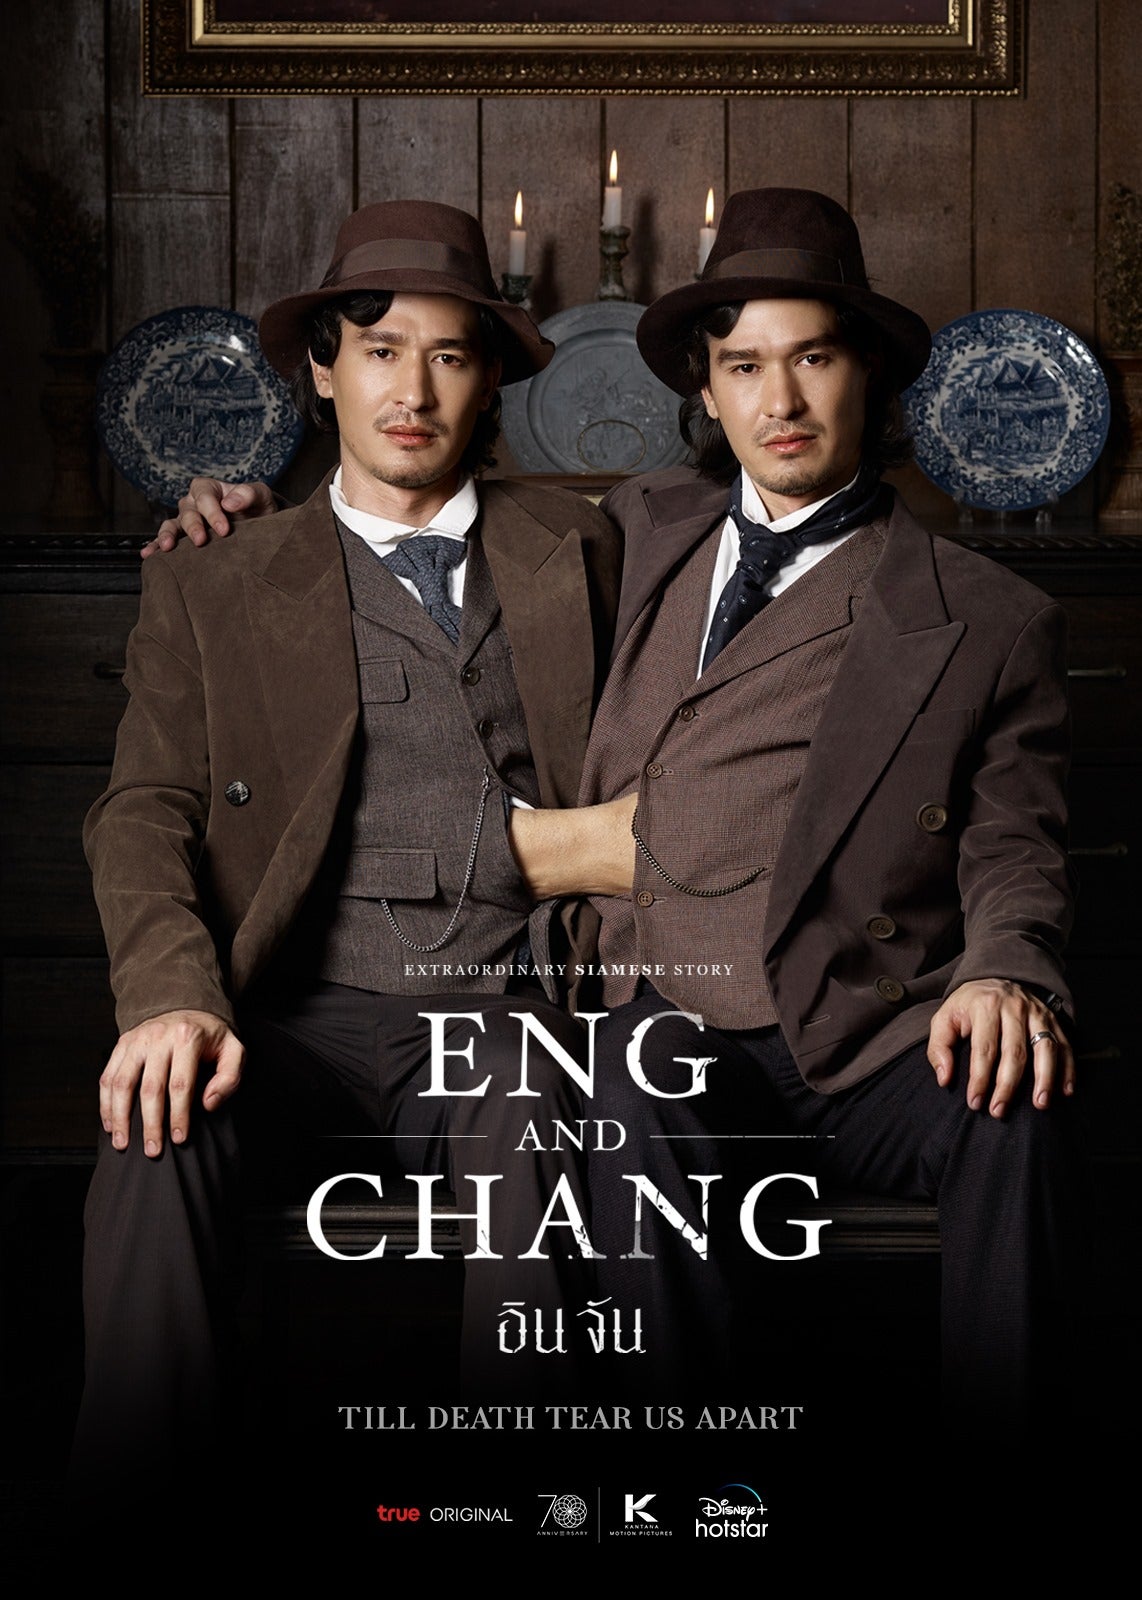 TV ratings for Extraordinary Siamese Story: Eng And Chang (อินจัน) in Germany. Disney+ TV series